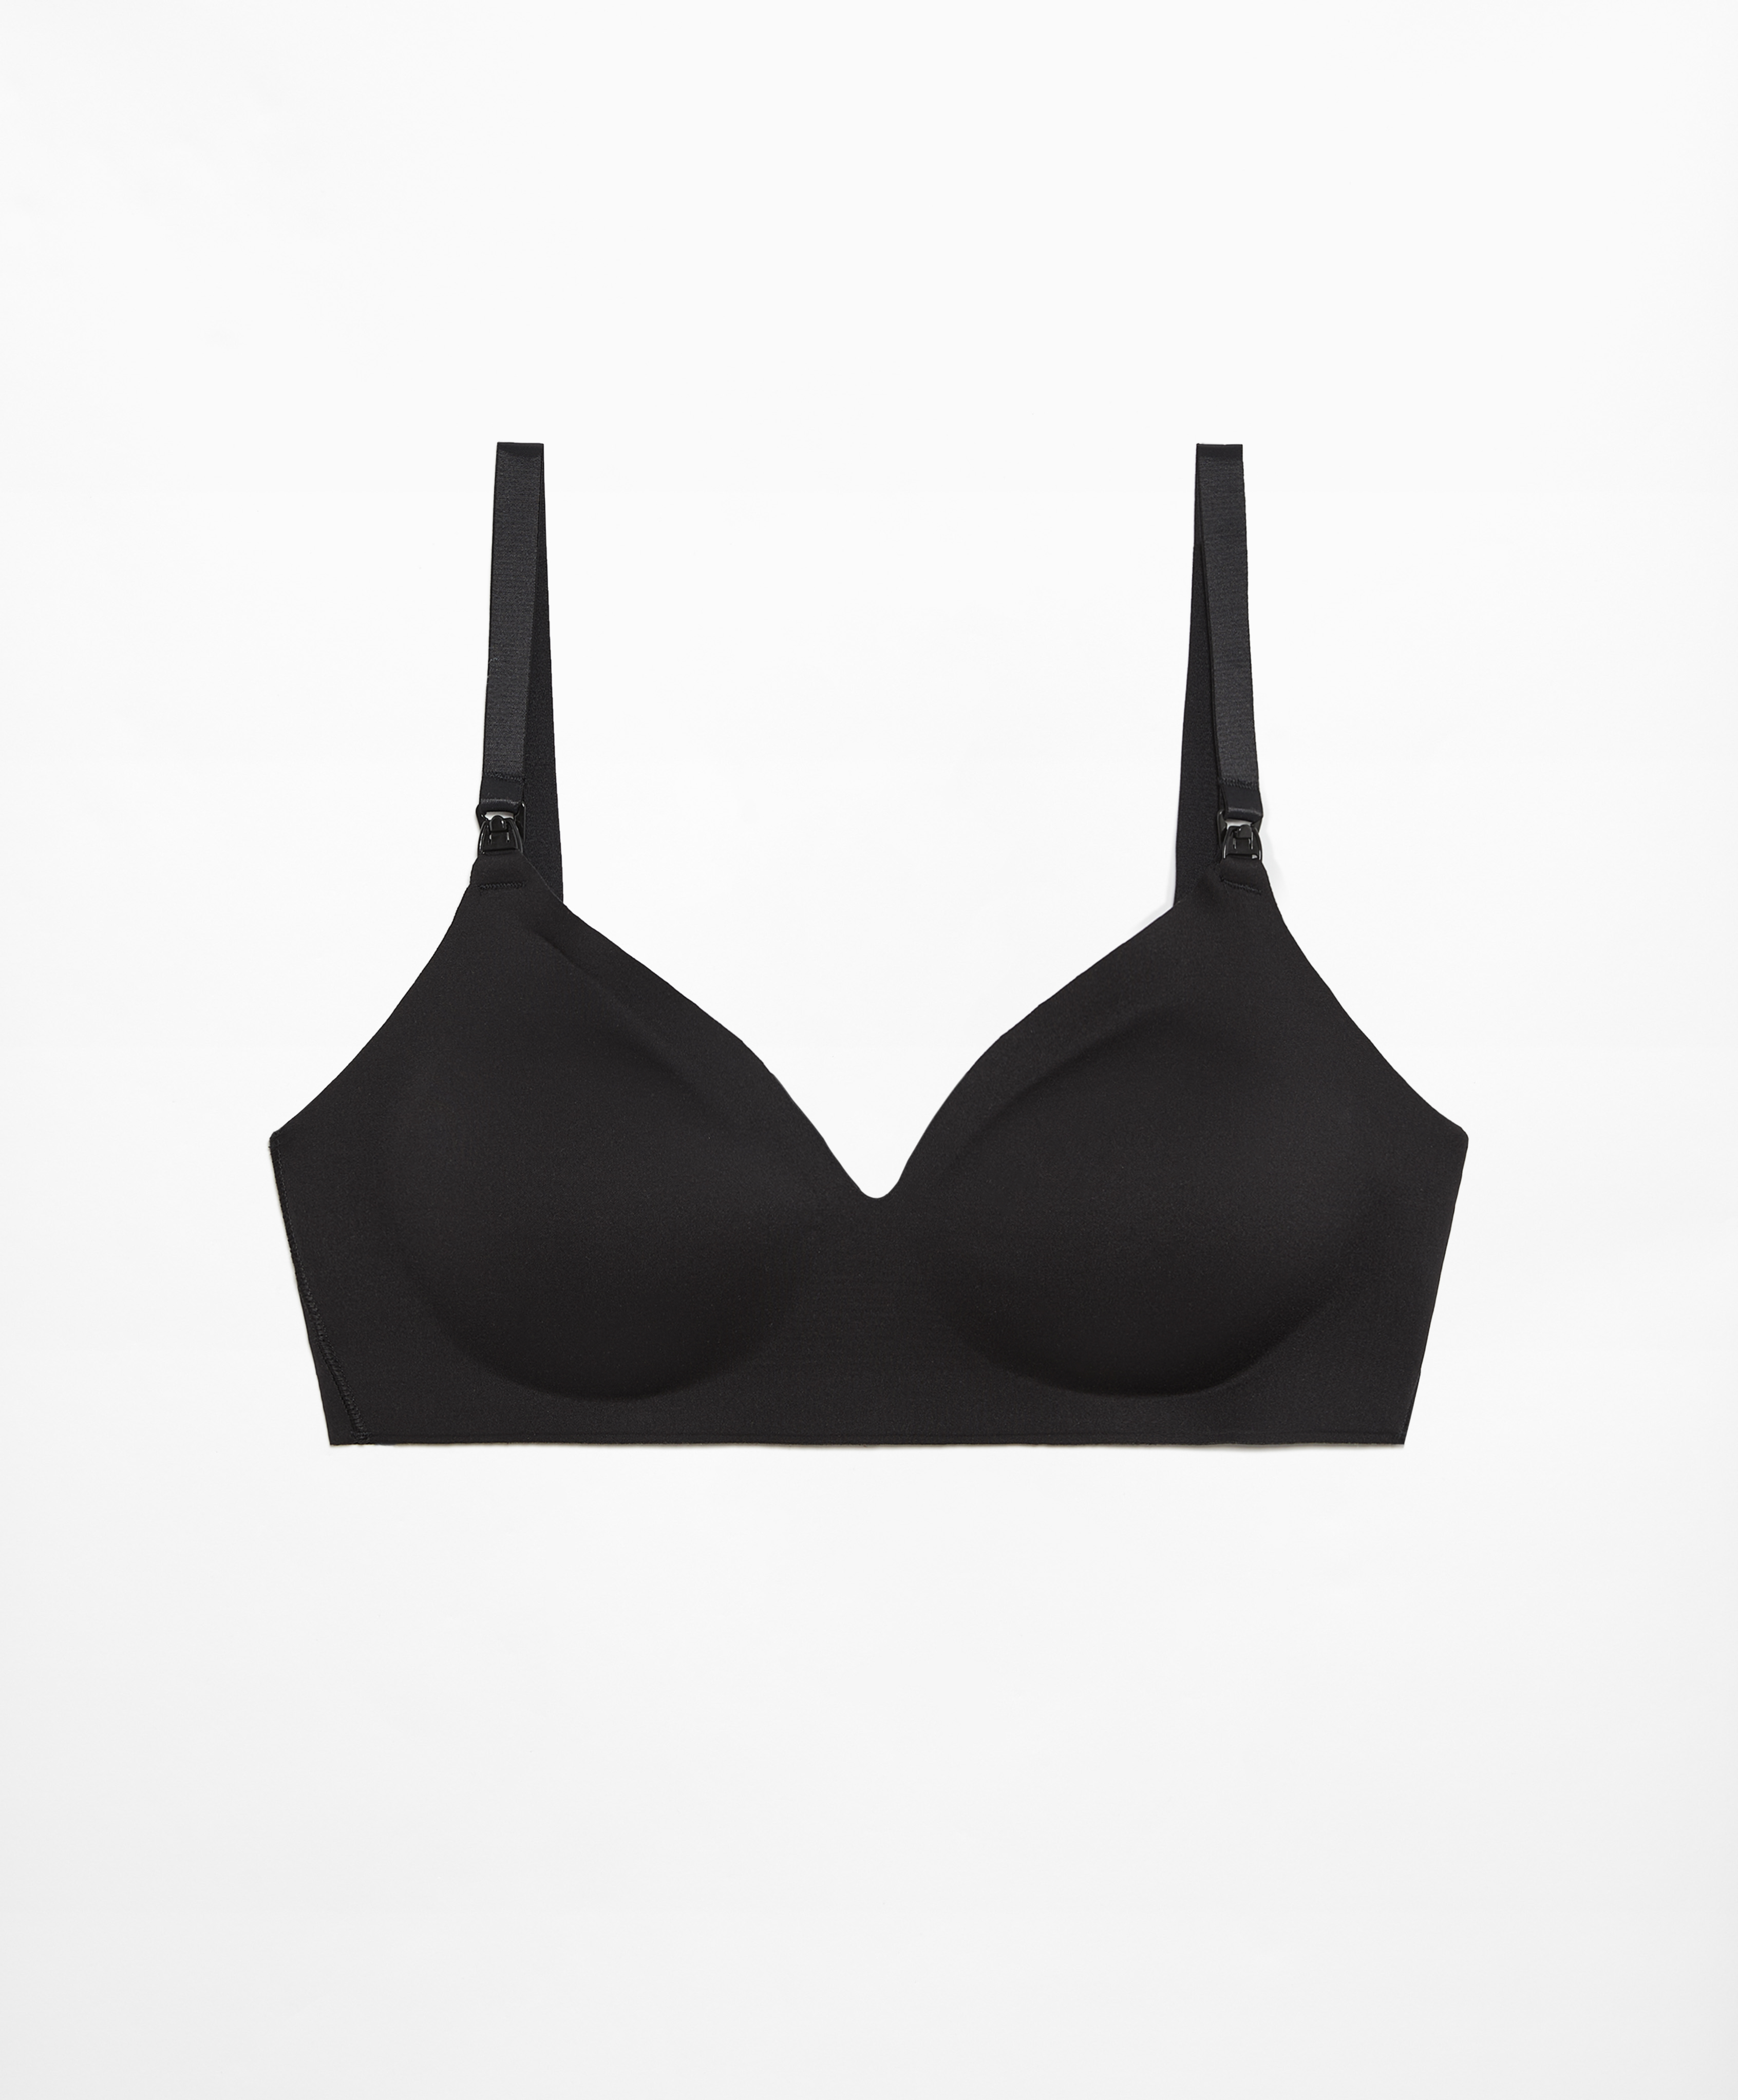 IVL Twisted Bra  Anthropologie Japan - Women's Clothing, Accessories & Home